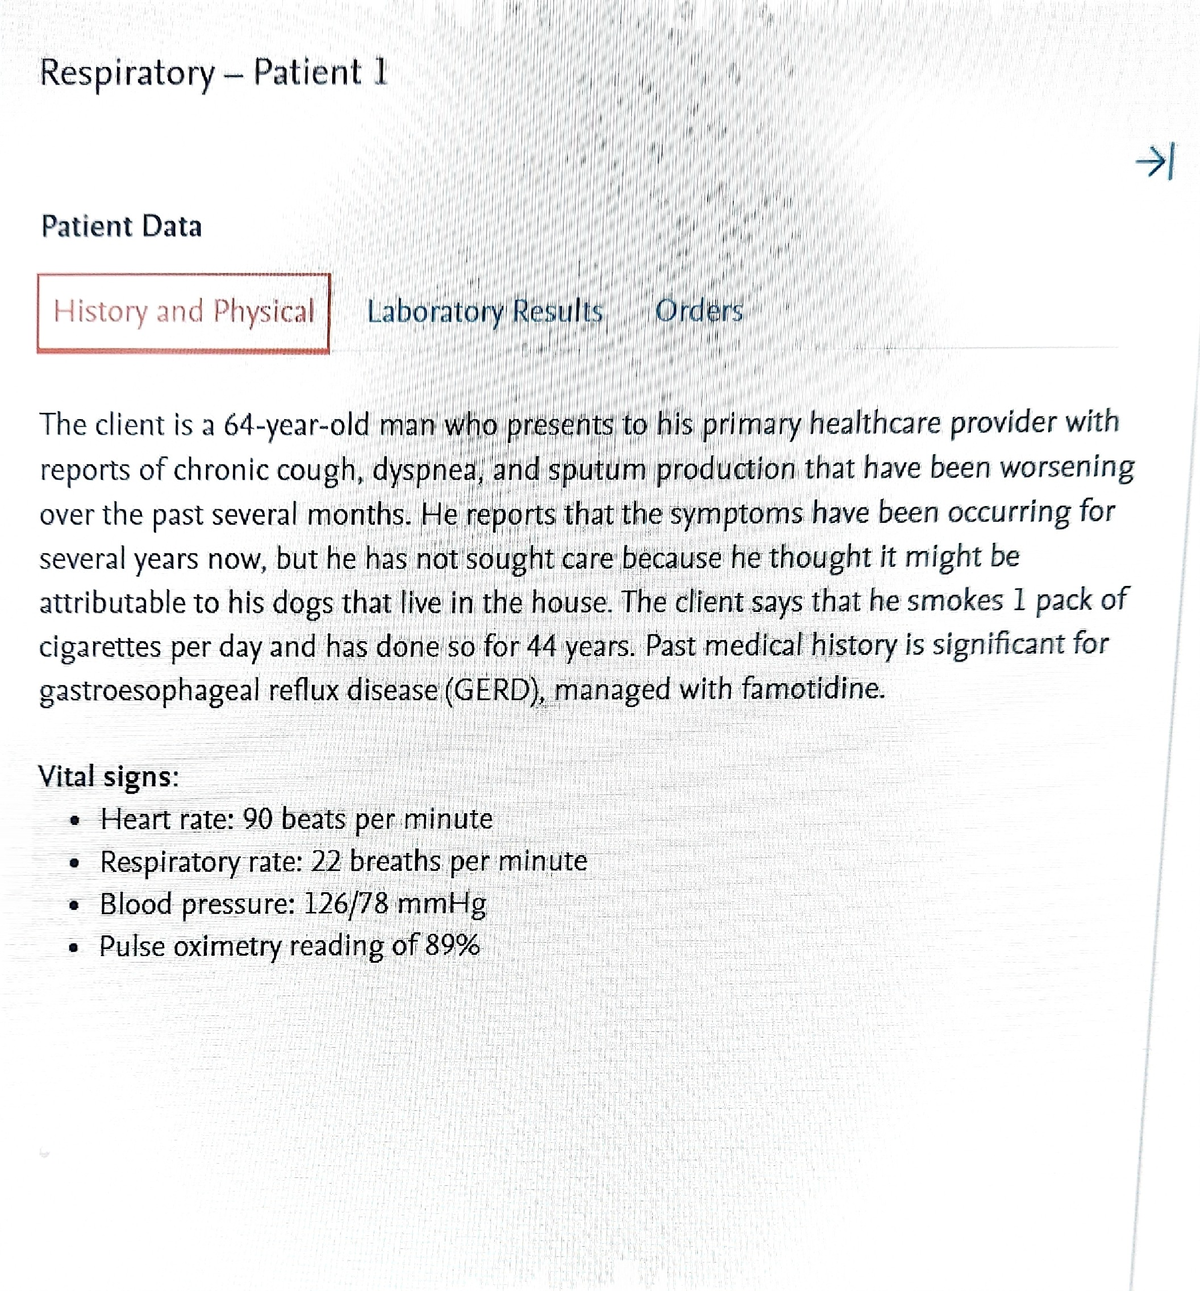 ngn case study respiratory patient 2